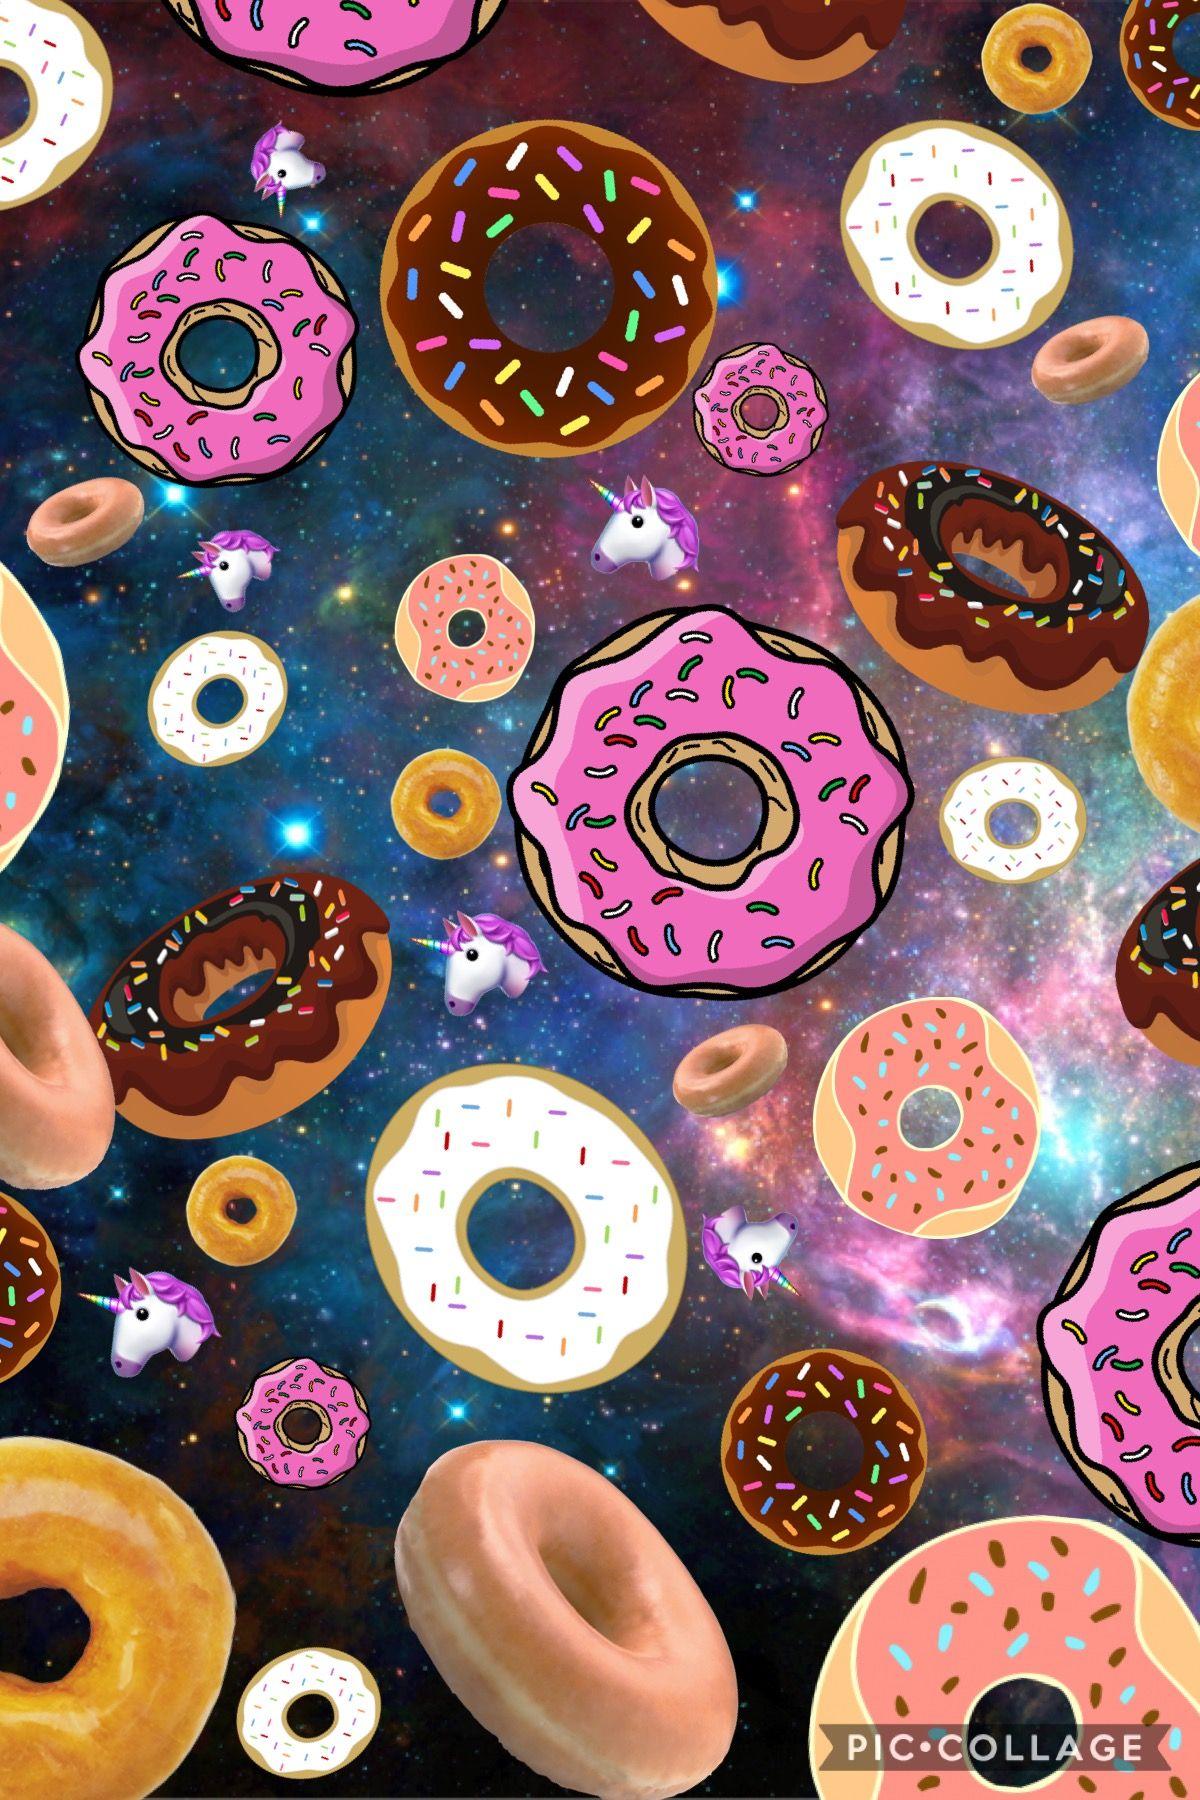 donut printable. Cute picture I like. Donuts